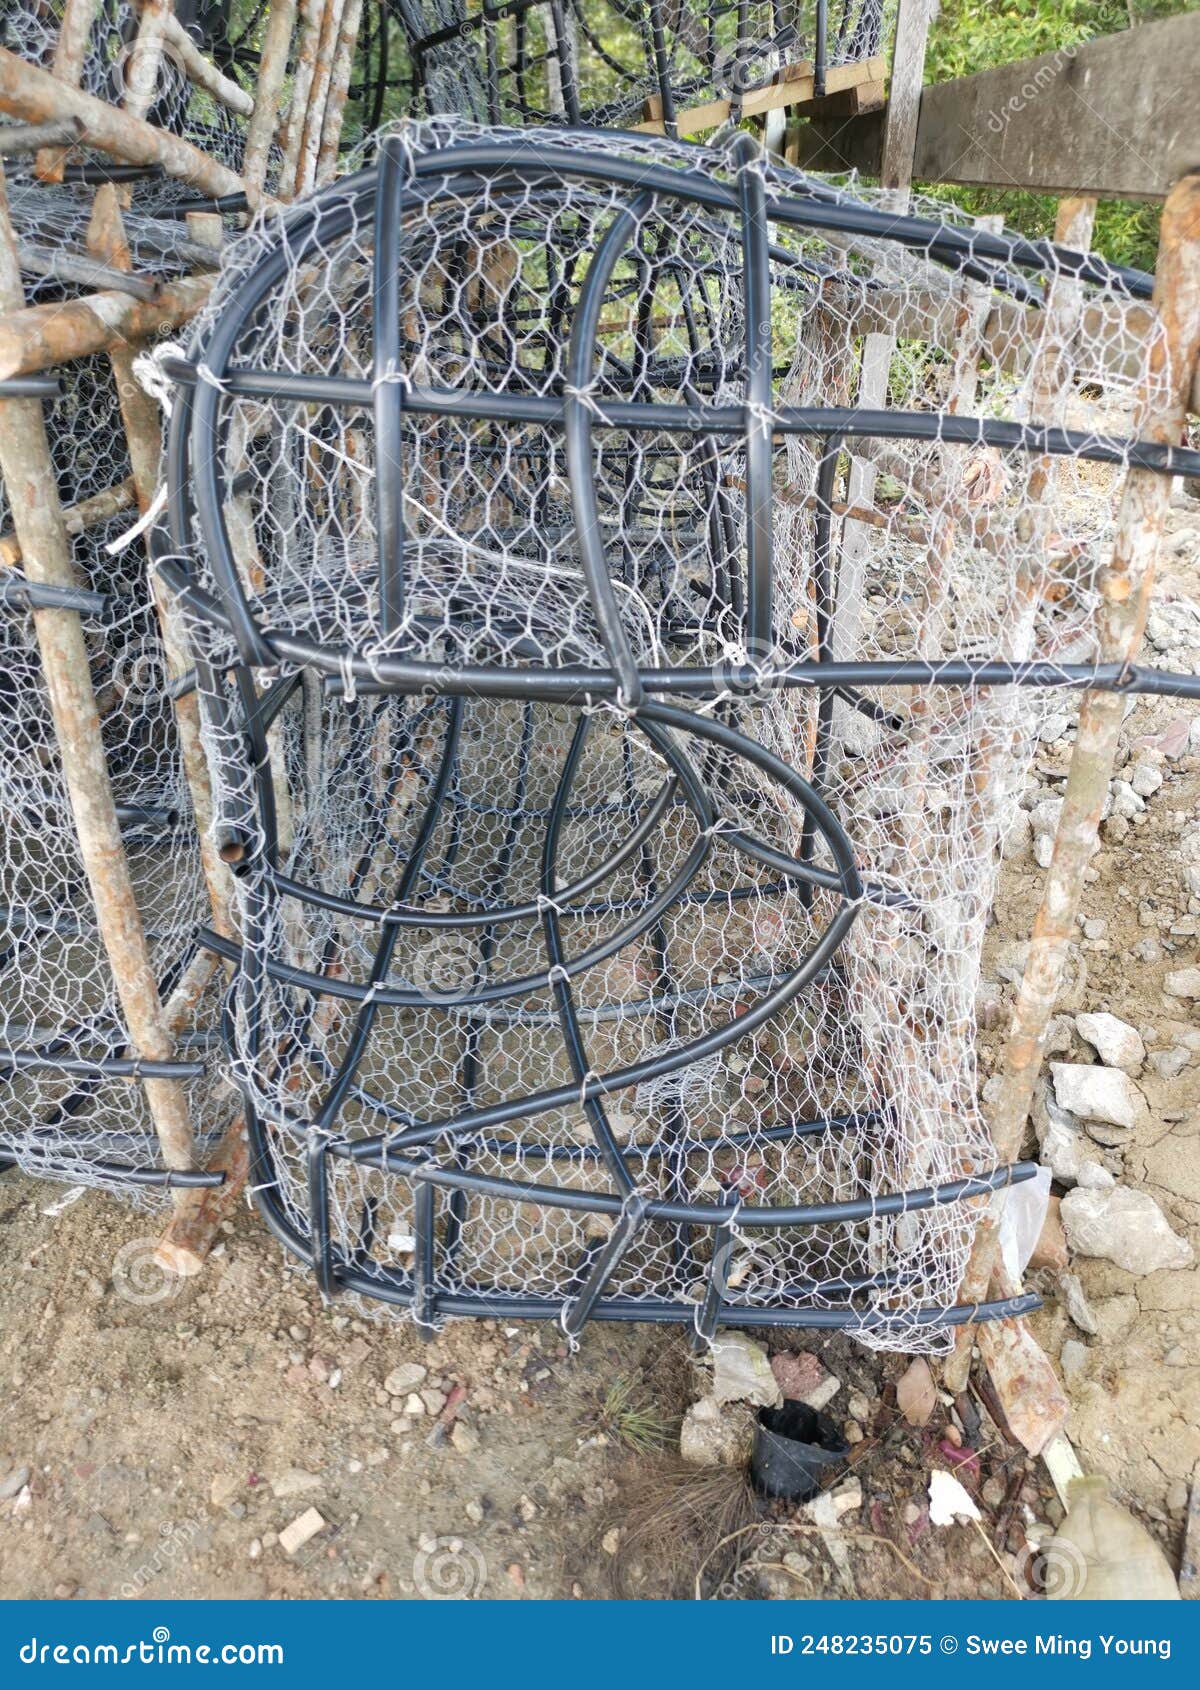 Outdoor Scene of the DIY Fish Trap Structure Make from Mangrove